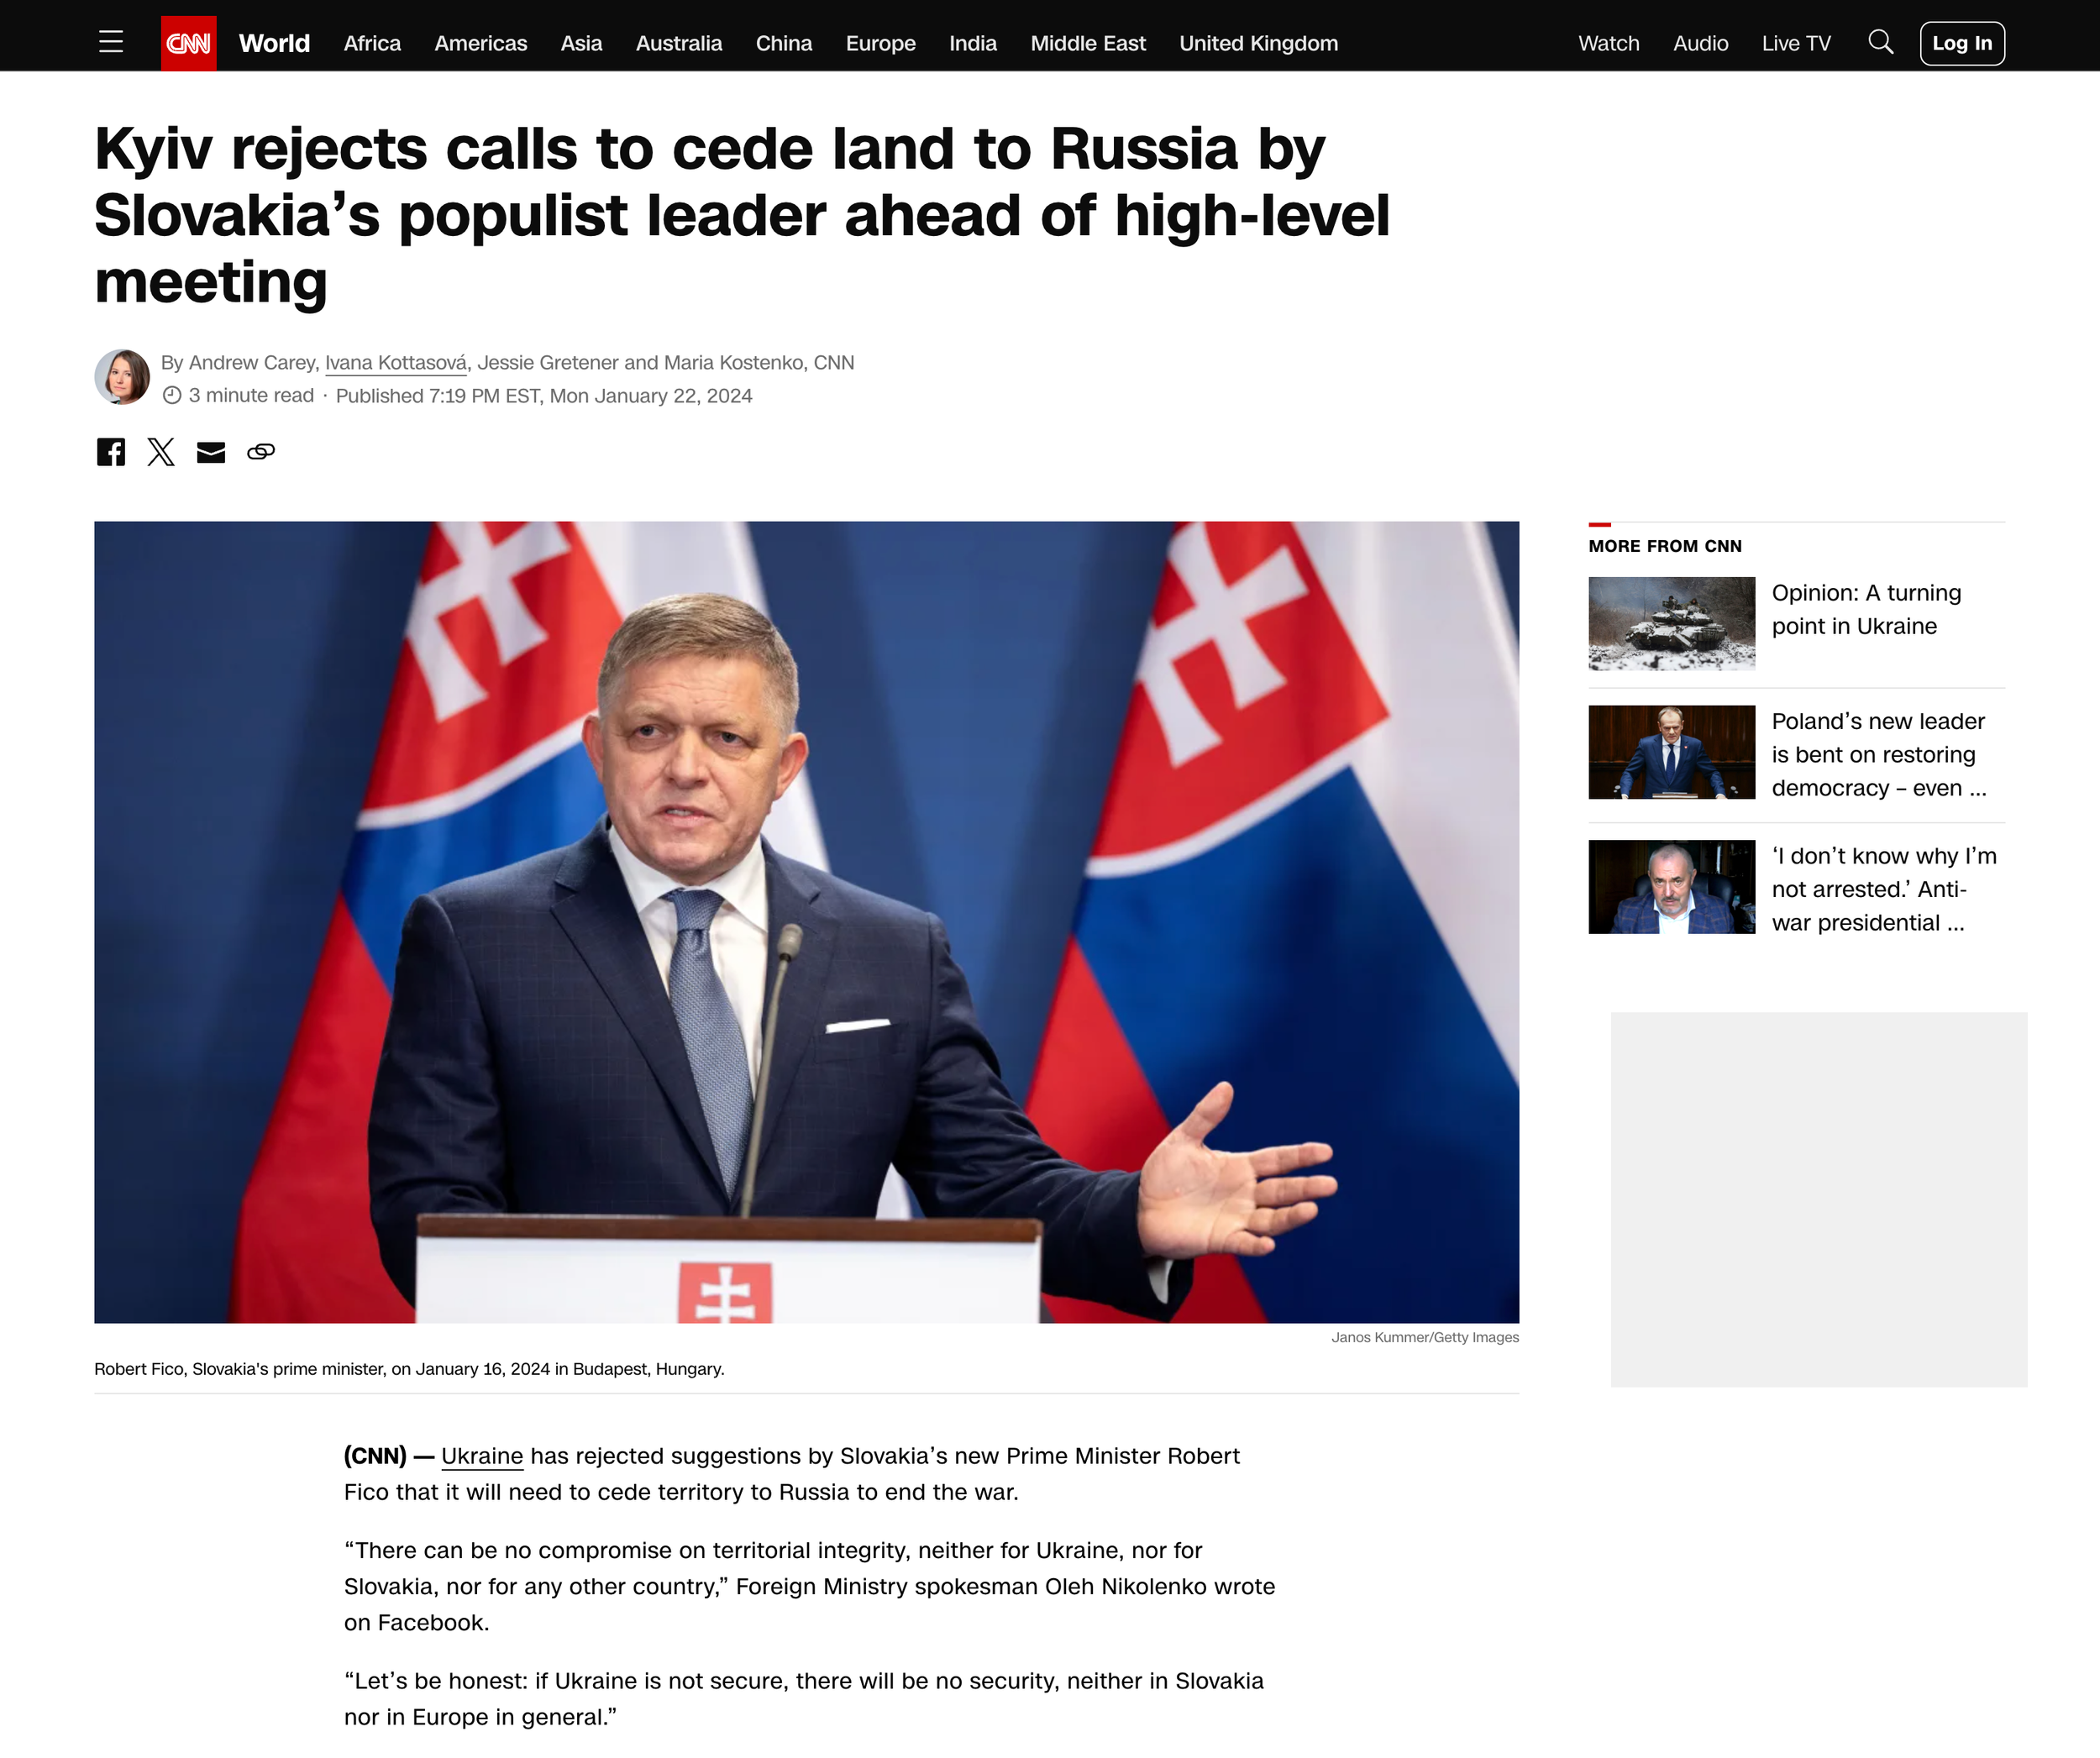 screencapture-edition-cnn-2024-01-22-world-kyiv-rejects-slovakia-leader-call-intl-index-html-2024-01-27-23_29_01.png